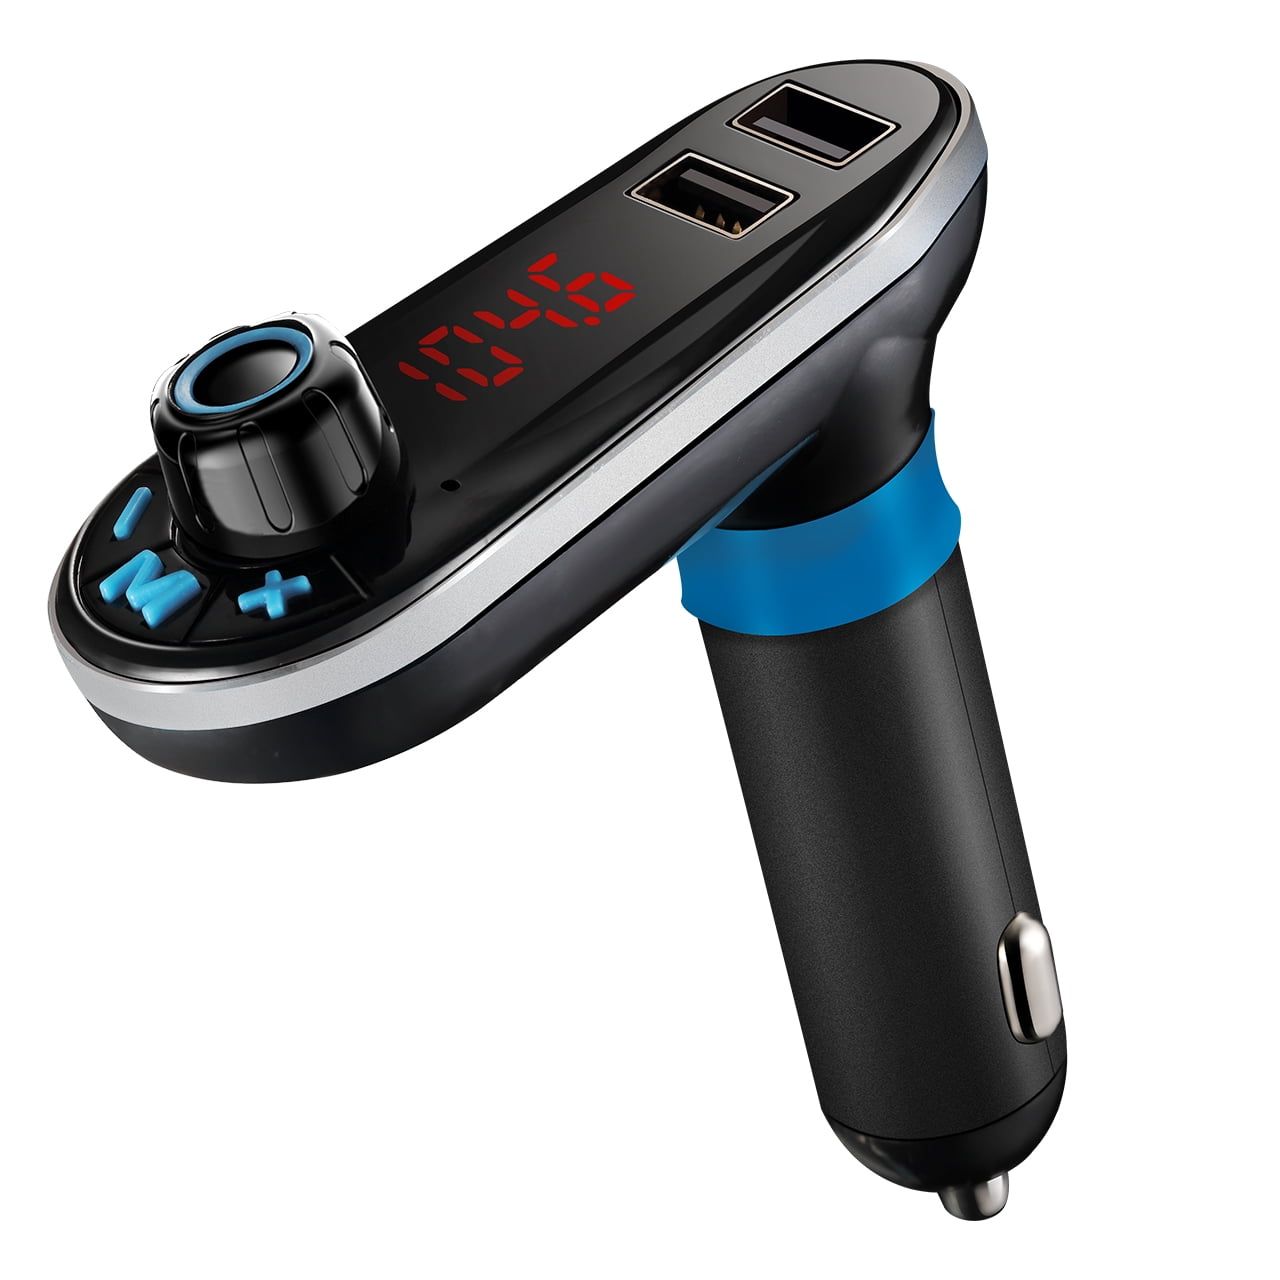 VicTsing Bluetooth FM Transmitter, Hands-free Car Kit Charger, Support TF Card/U-disk ...1280 x 1280